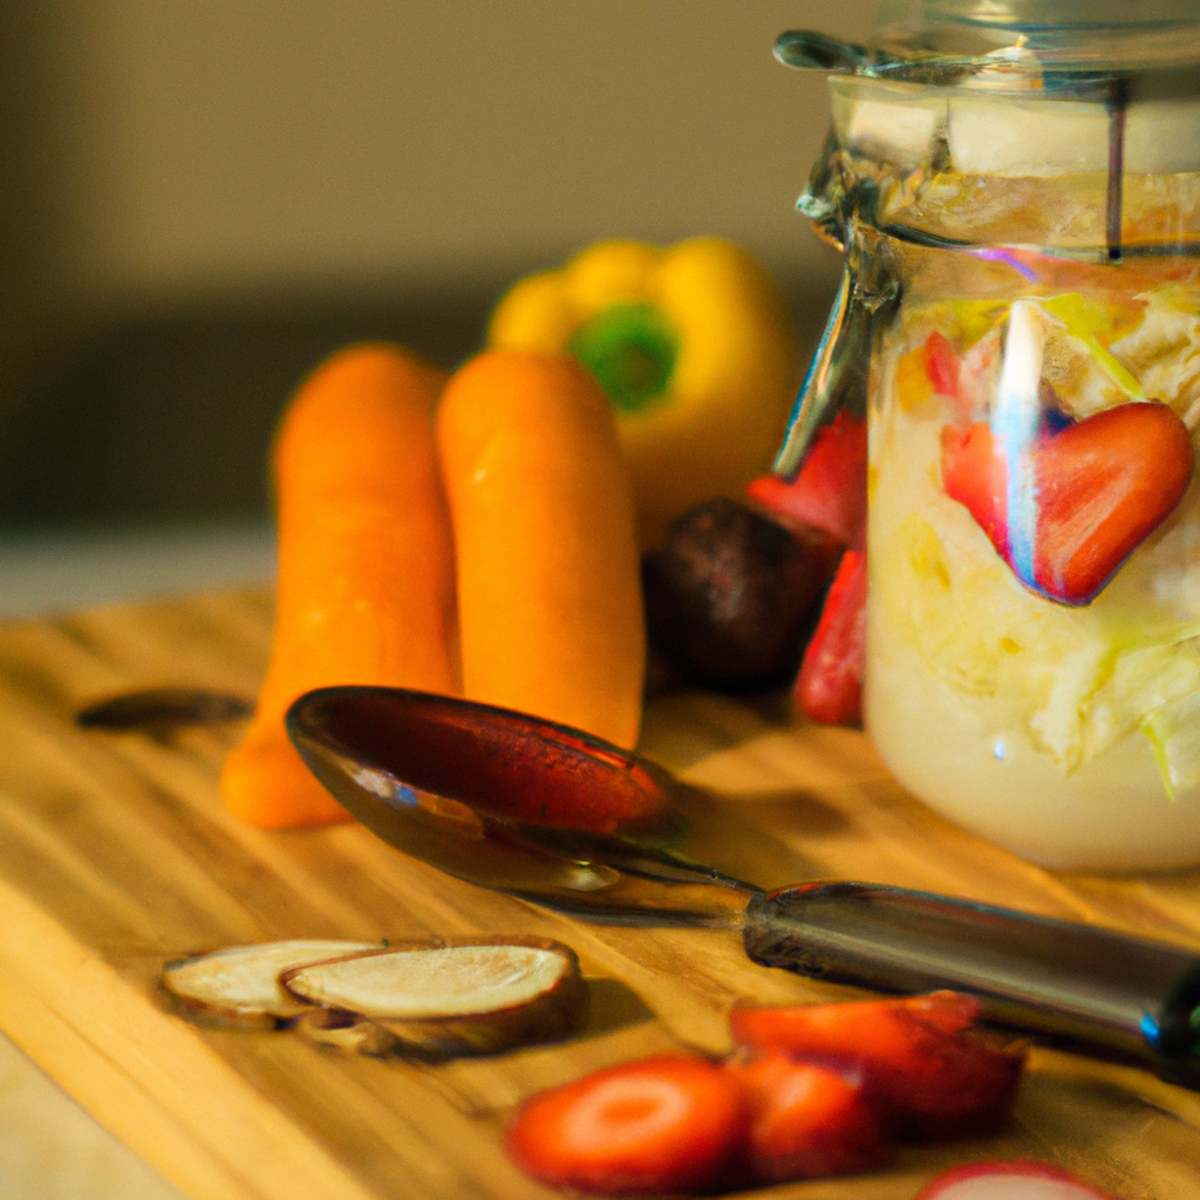 The photo features a wooden cutting board with a variety of colorful fruits and vegetables, including sliced carrots, bell peppers, and strawberries. In the center of the board sits a small glass jar filled with homemade probiotic-rich sauerkraut. A spoon rests on the side of the jar, ready to scoop out a serving. The background is blurred, but hints of a kitchen can be seen, with a stainless steel refrigerator and a wooden countertop visible. The photo captures the essence of the article, showcasing the natural and healthy ingredients that can be used to create probiotic-rich foods for optimal gut health.